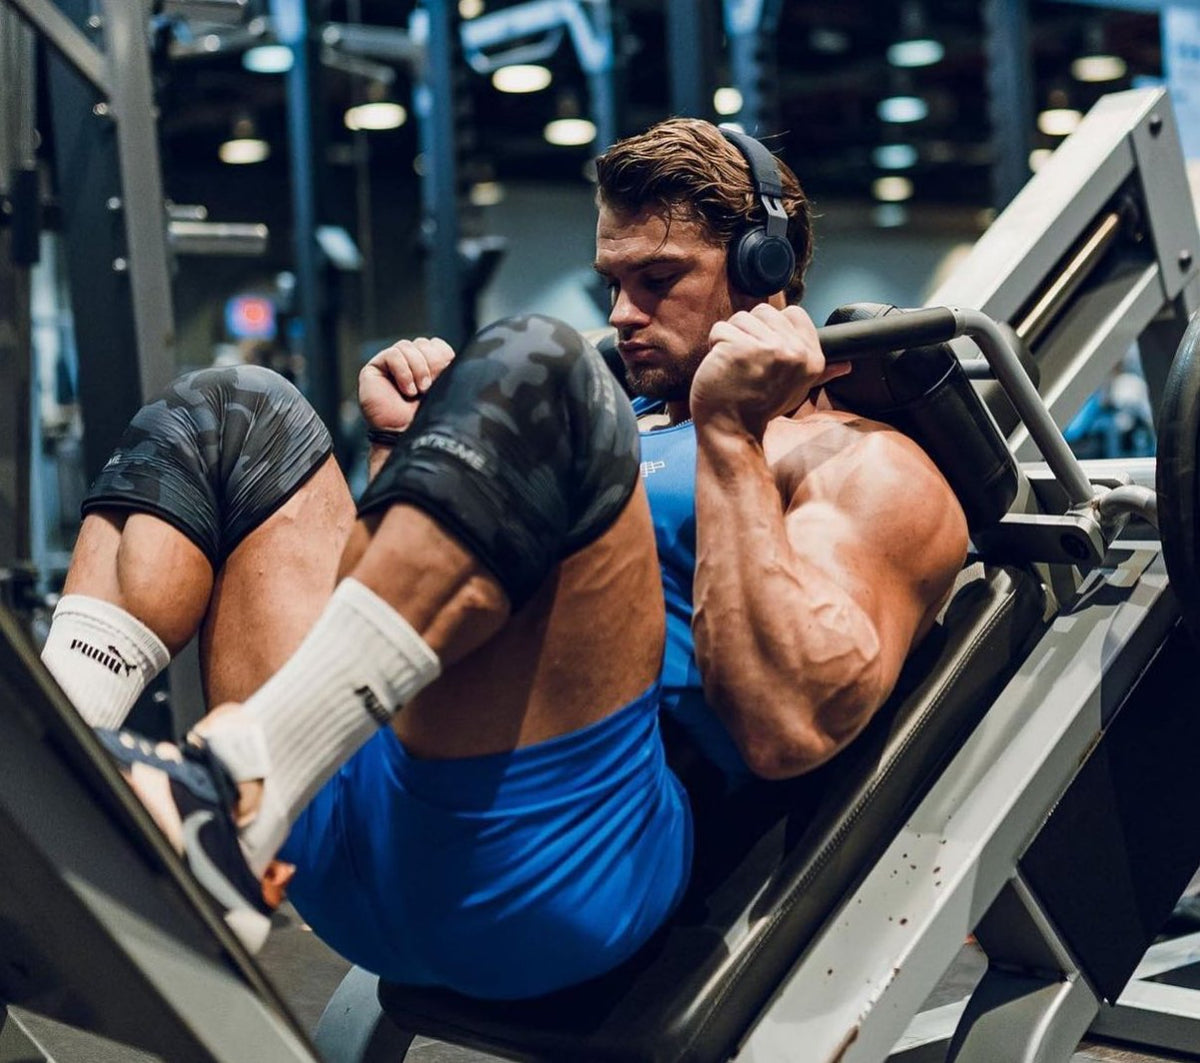 Building thighs: Why is it so important in bodybuilding?